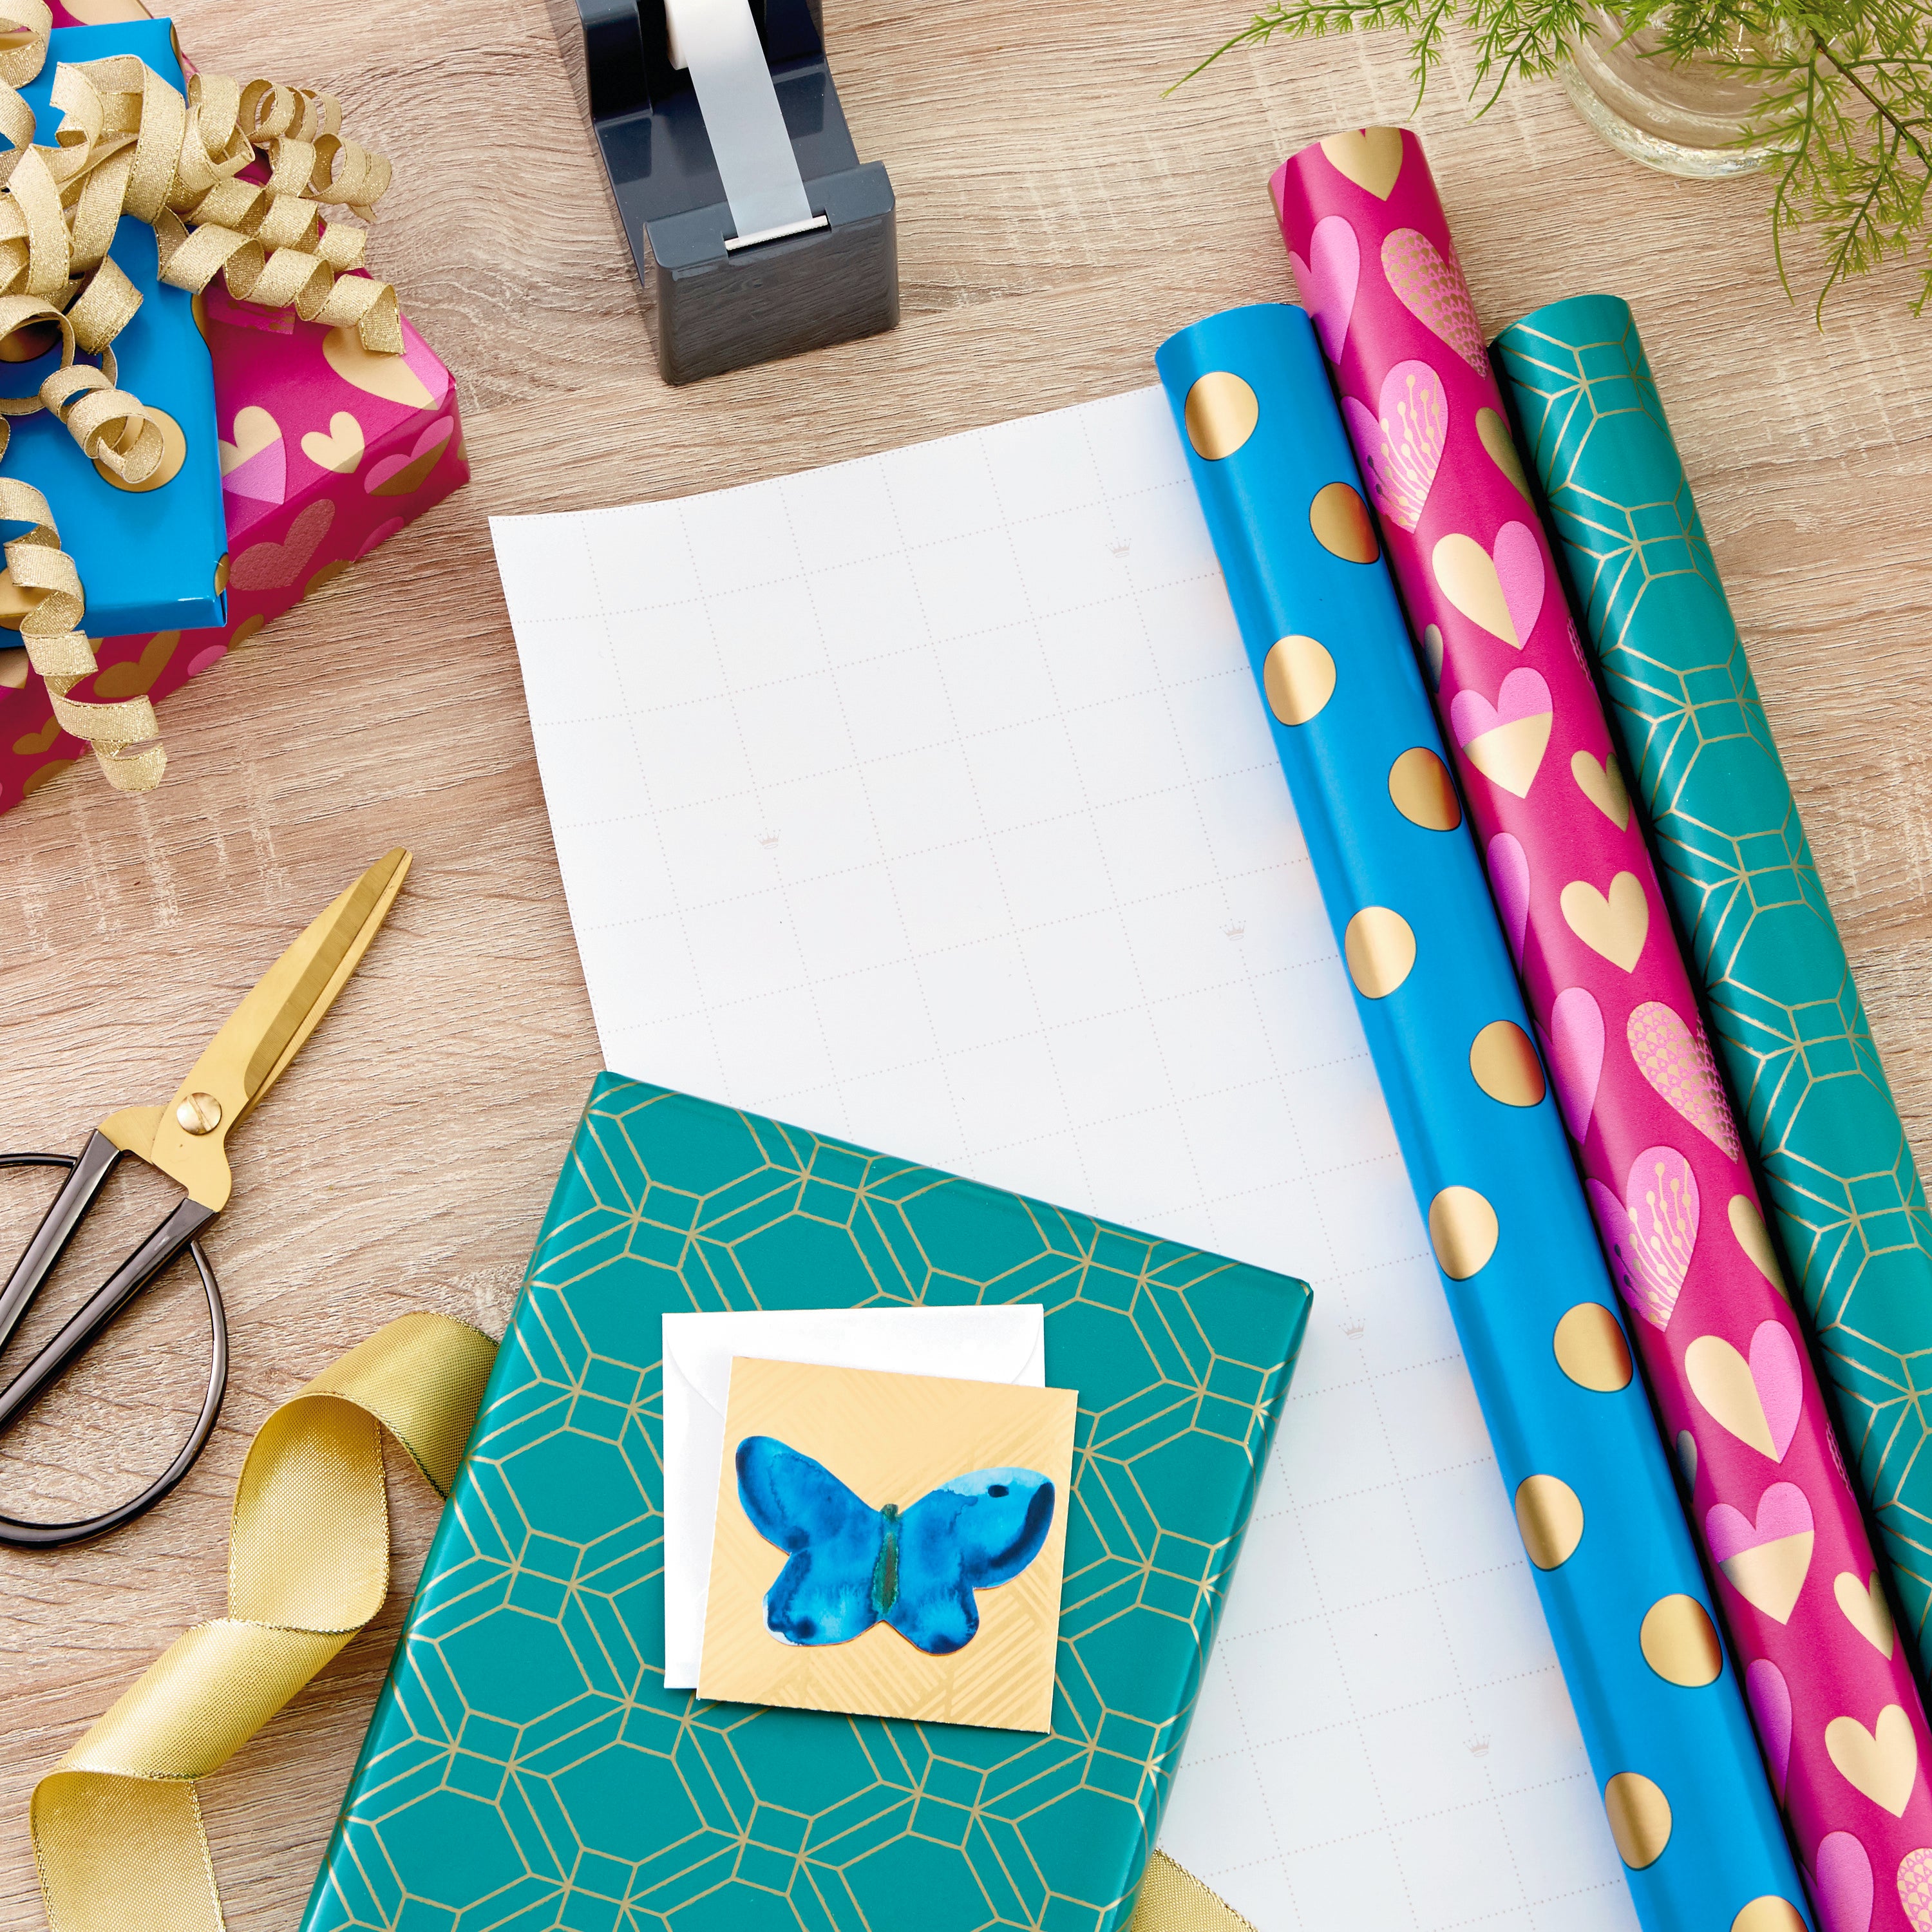 Hallmark All Occasion Wrapping Paper Bundle with Cut Lines on Reverse - Blue, Emerald, Magenta & Gold (3-Pack: 105 sq. ft. ttl.) for Birthdays, Weddings, Valentine's Day, Graduations & Bridal Showers